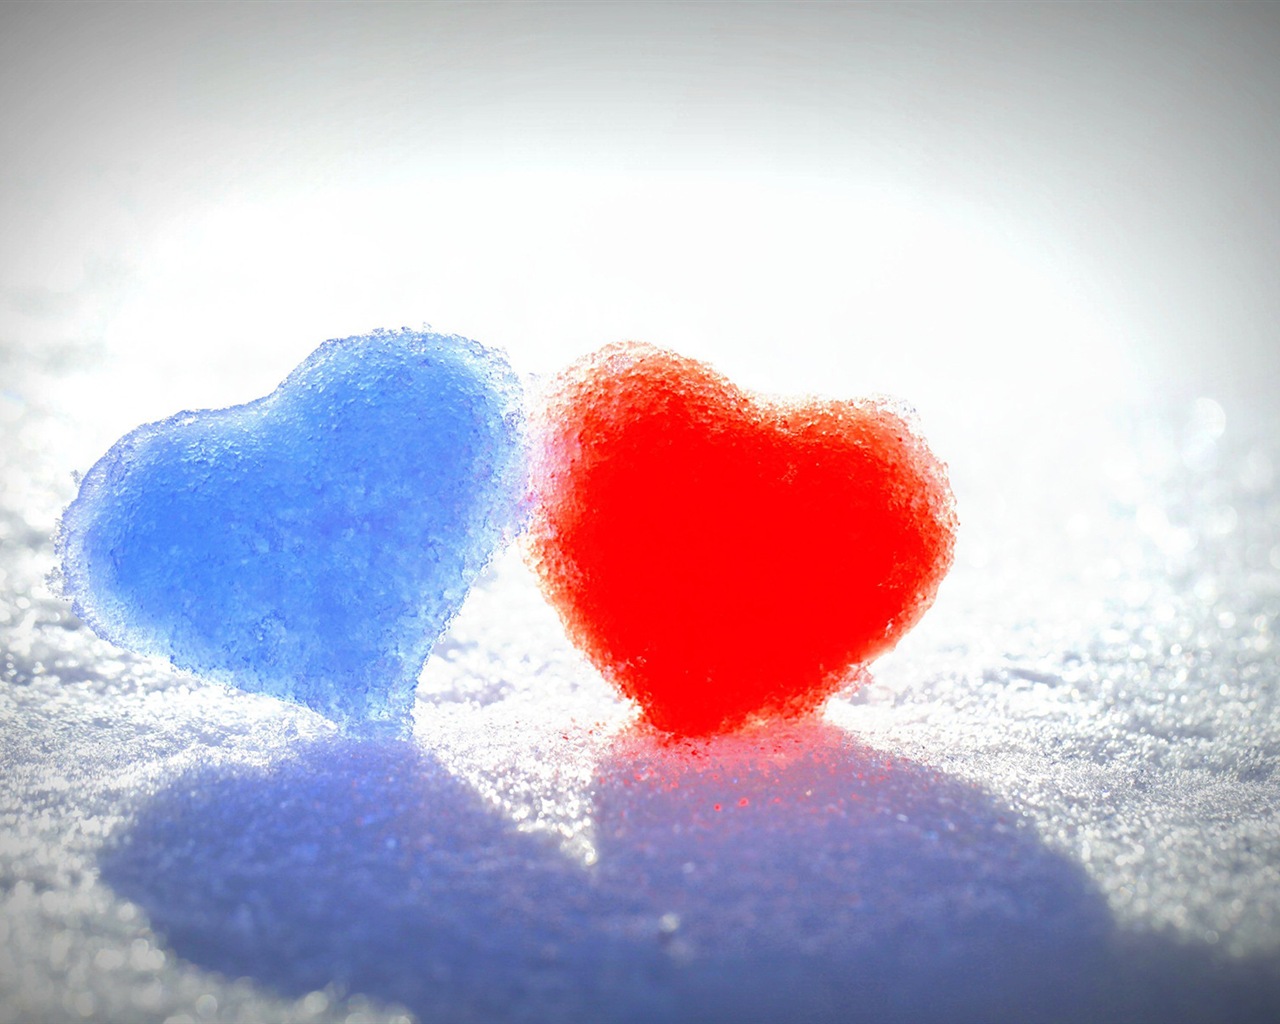 The theme of love, creative heart-shaped HD wallpapers #13 - 1280x1024